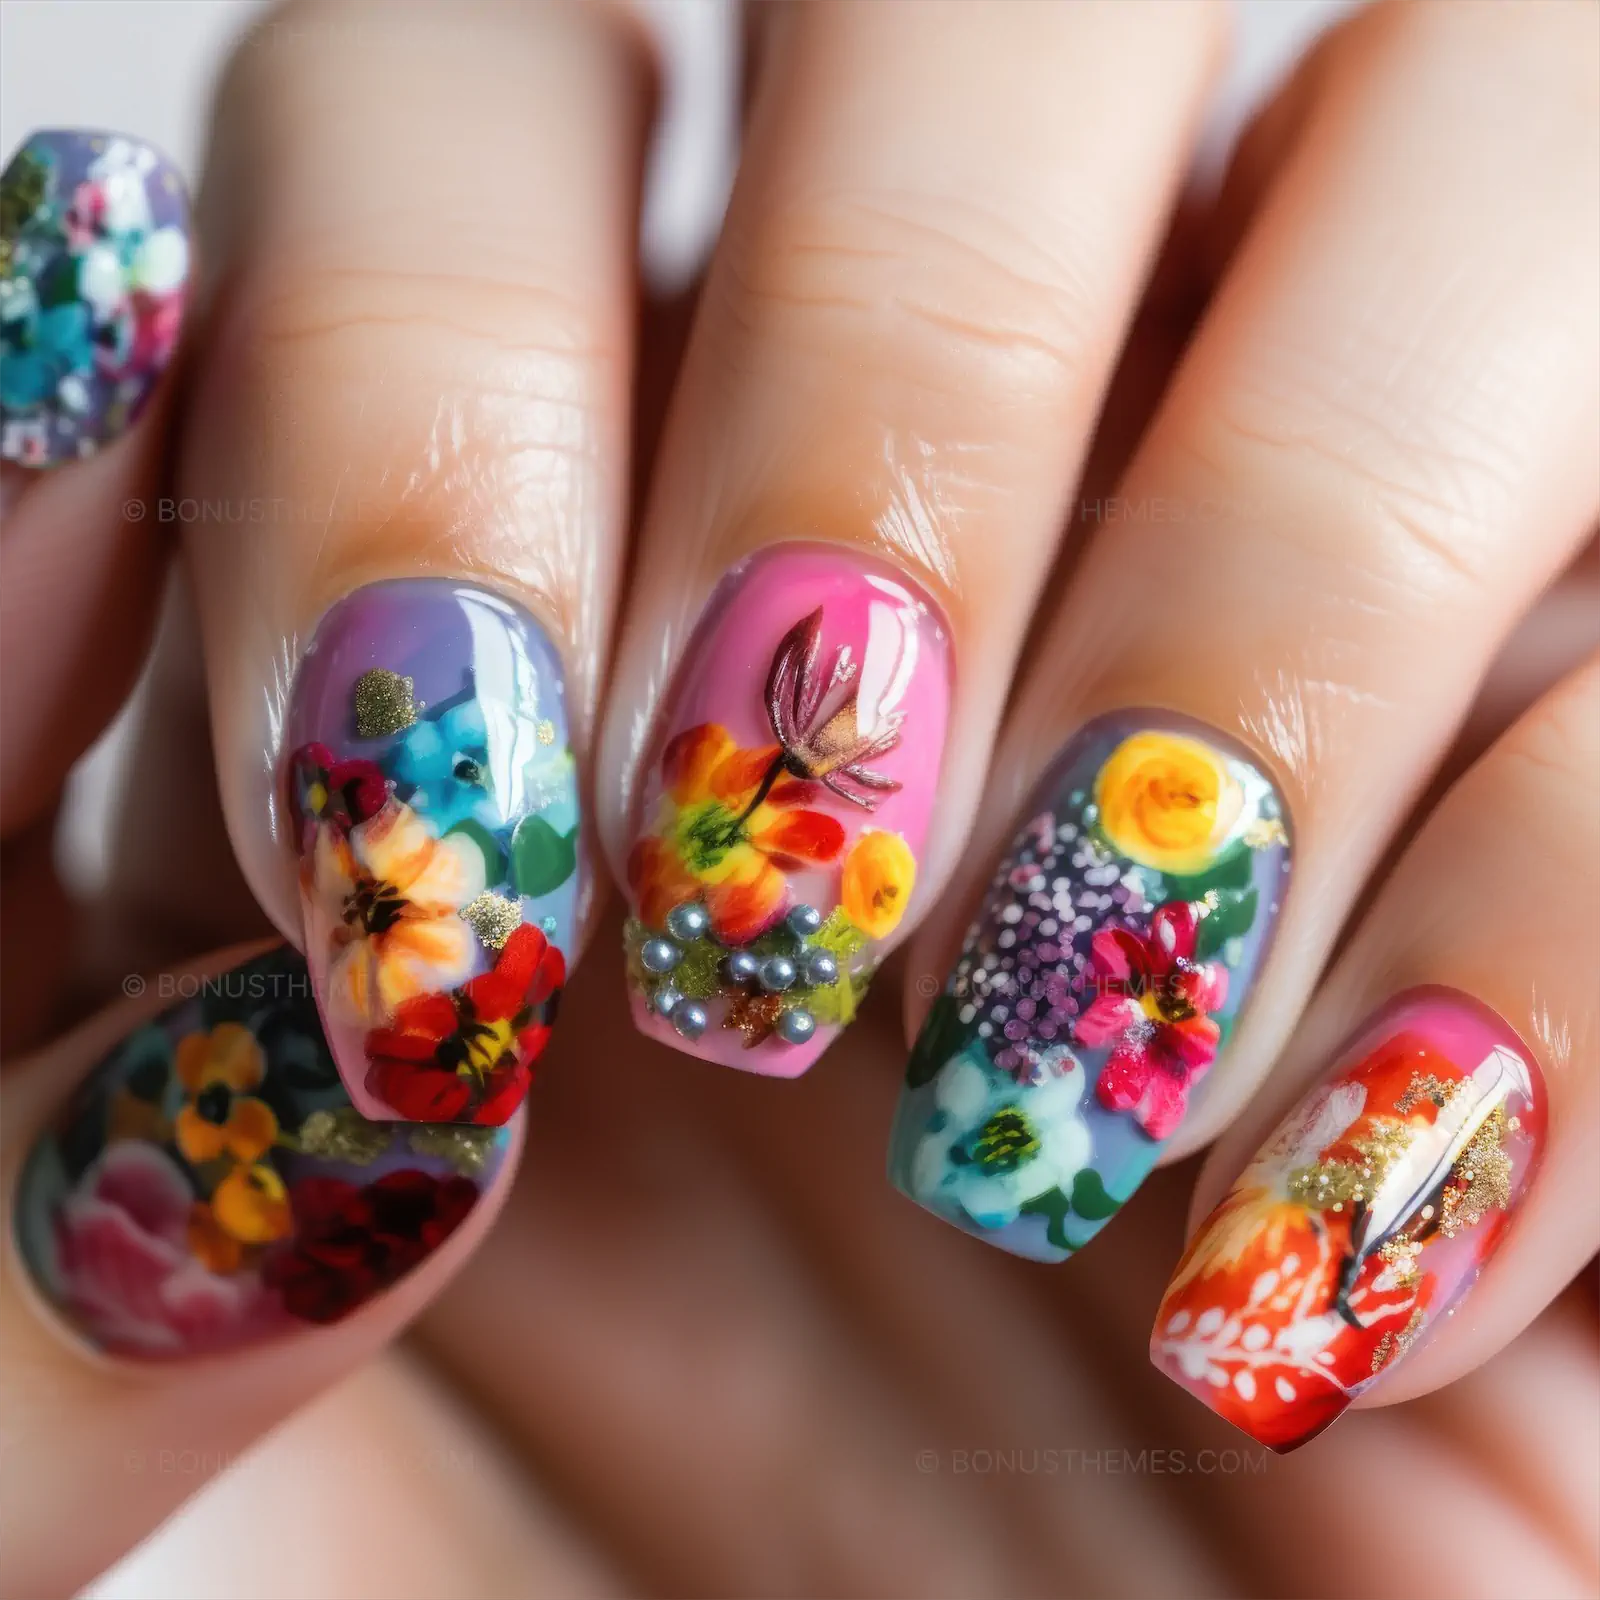 Fingers with colorful nails